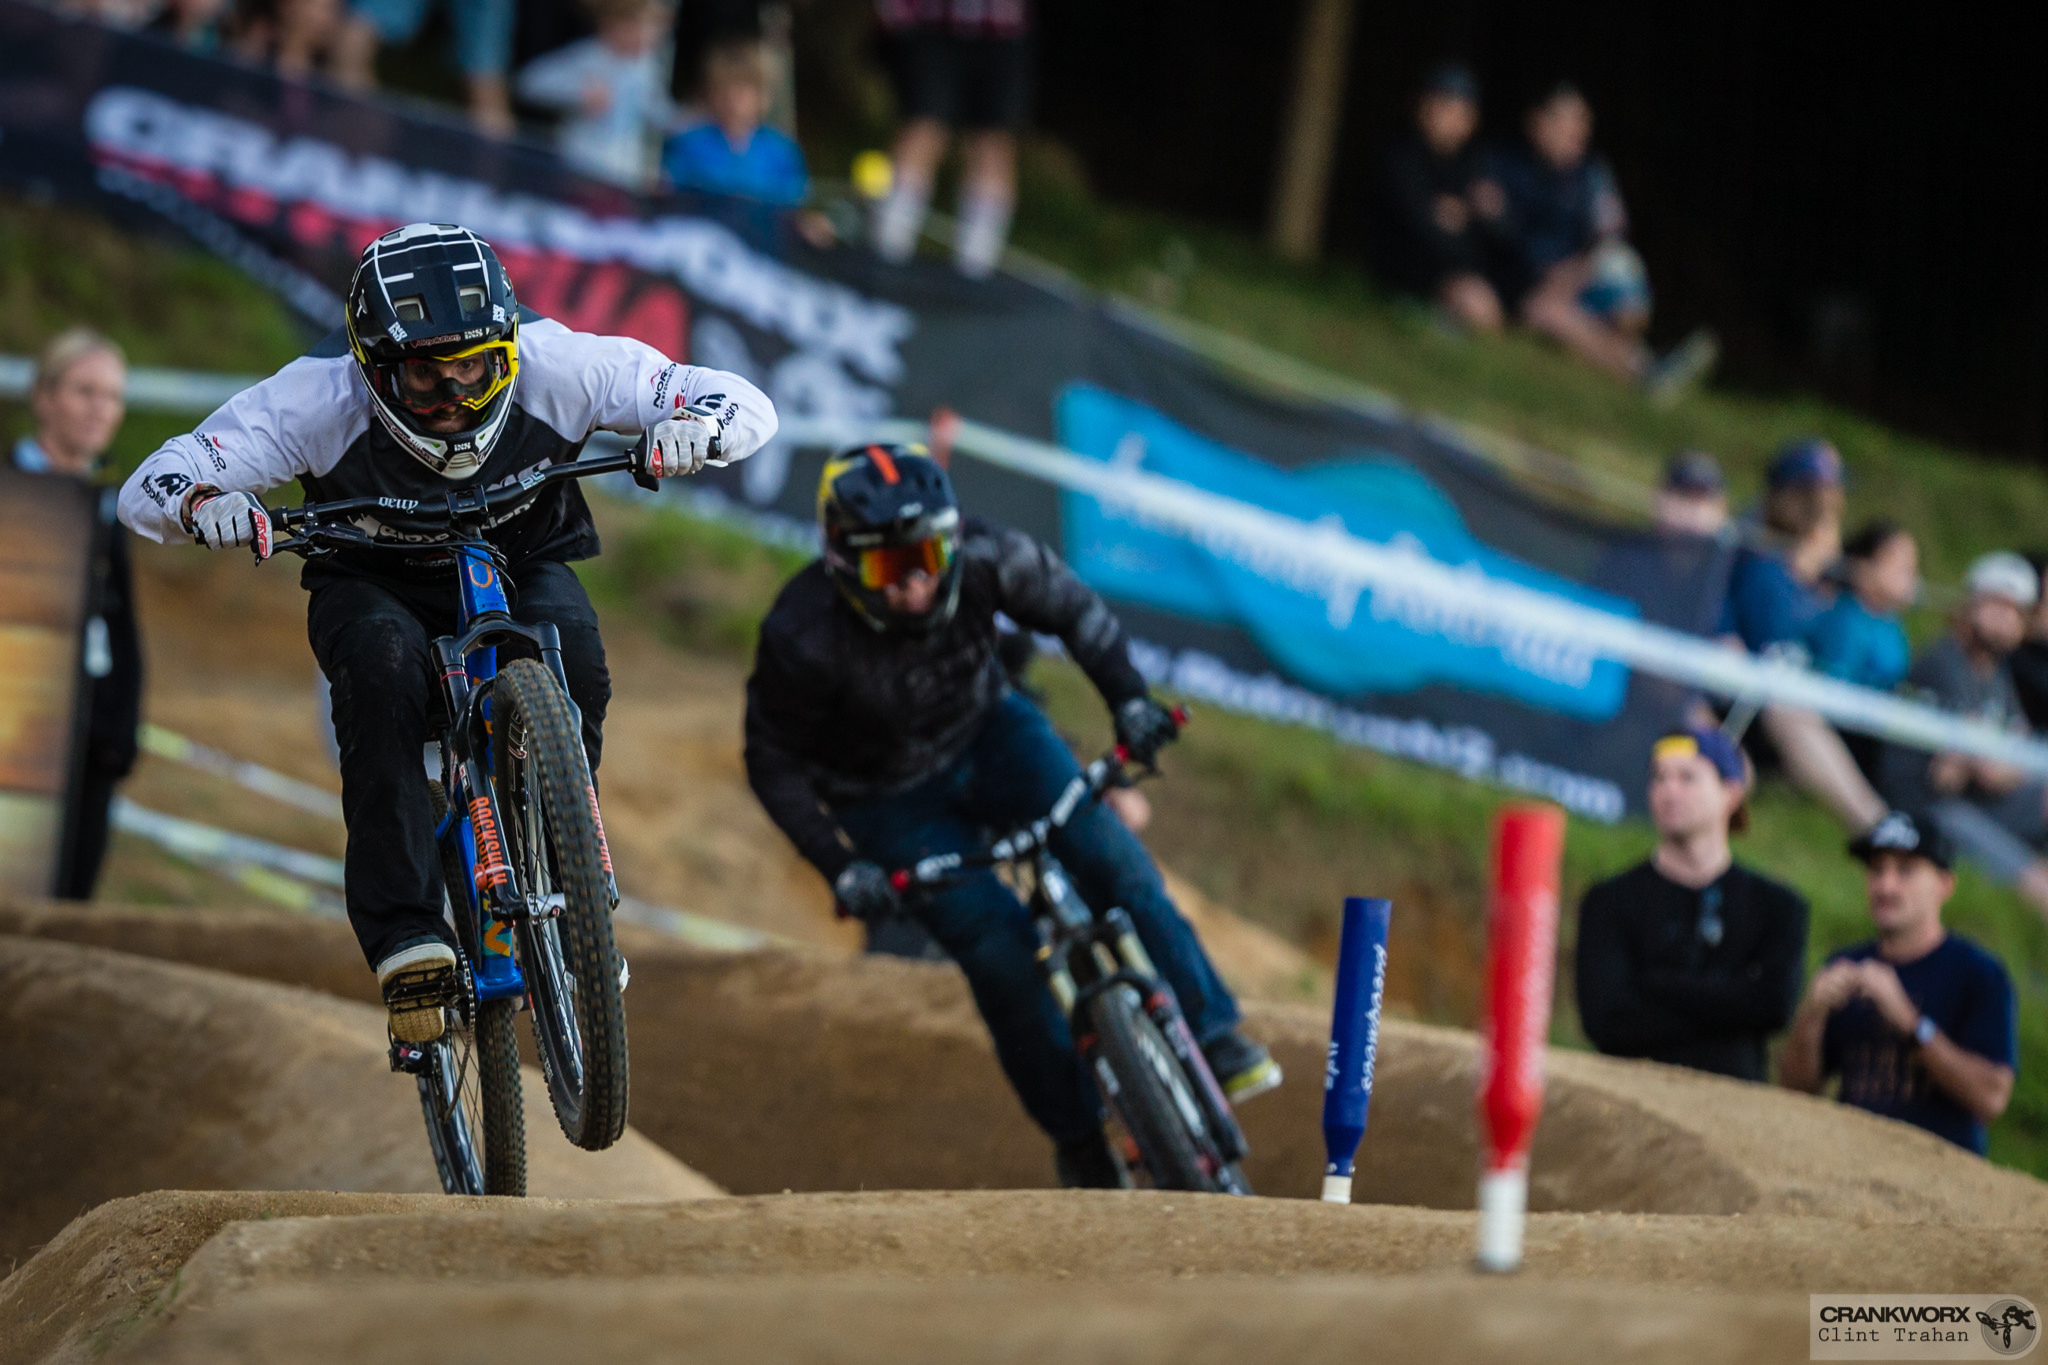 Adrien Loron during the Mons Royale Dual Speed and Style at Crankworx in Rotorua, New Zealand. Photo - Clint Trahan